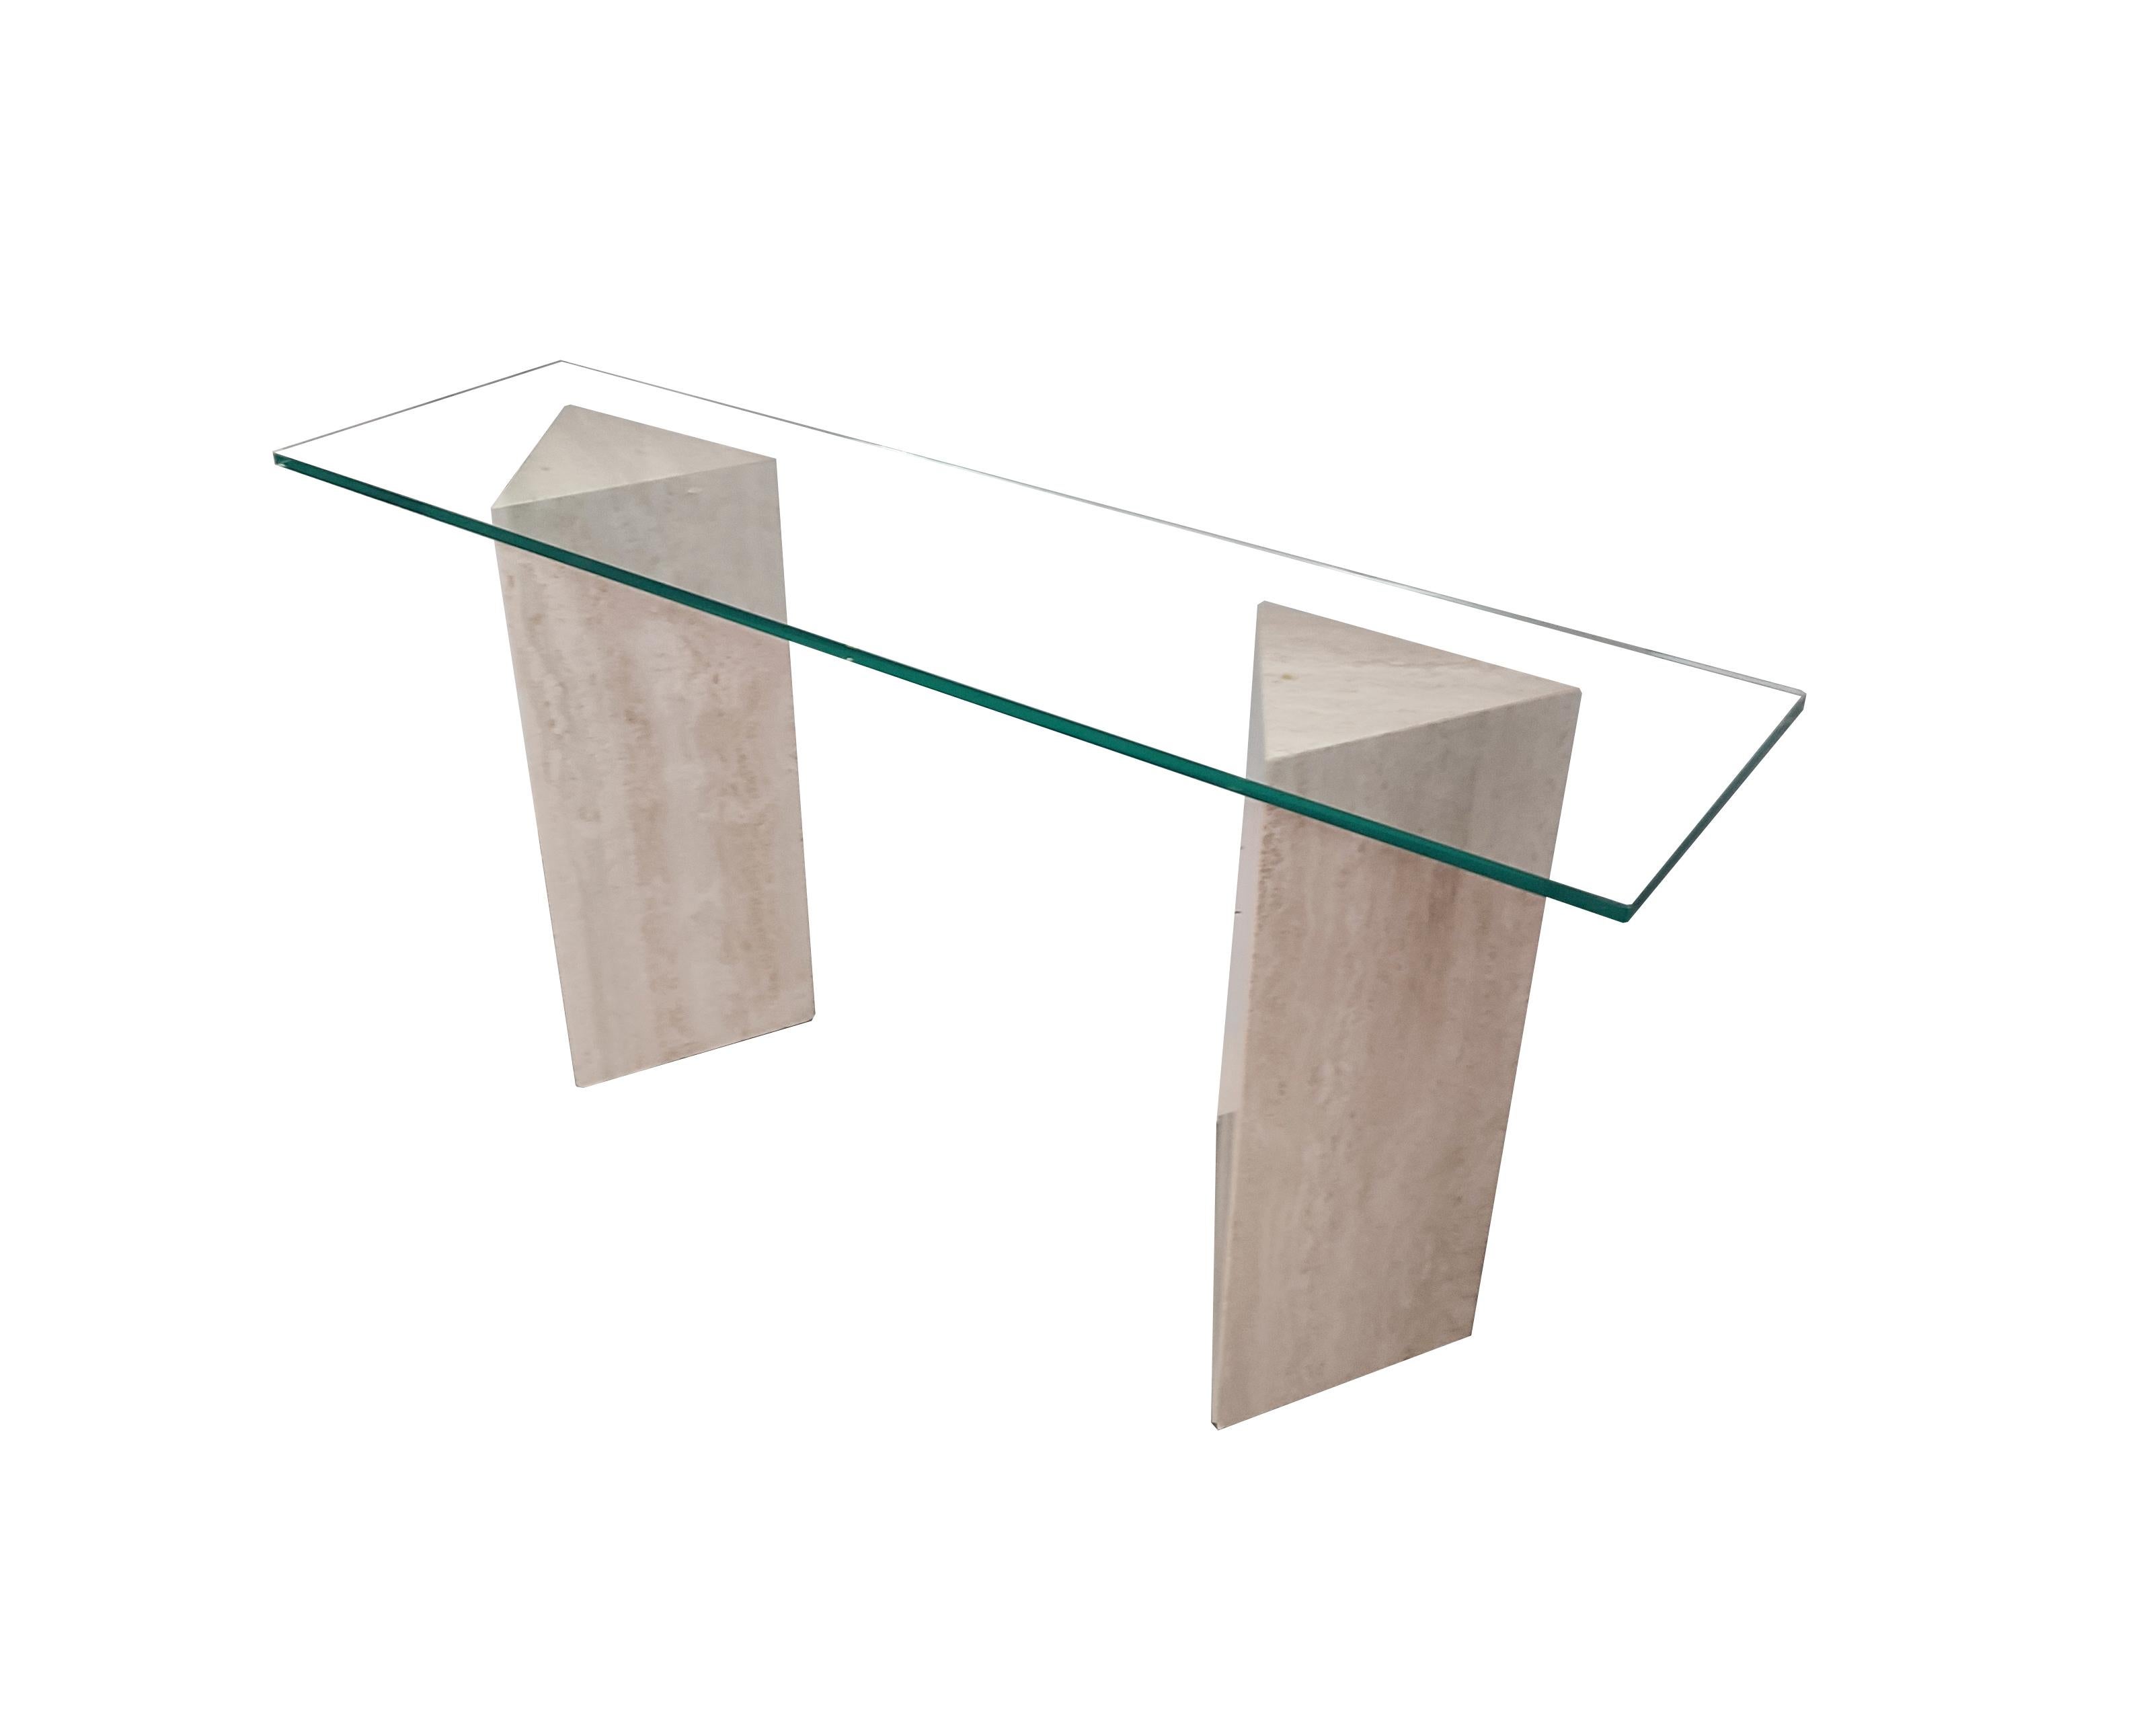 Tria Console Table Travertine Marble MidCentury '99 Modern Design Spain In Stock
The Tria polished travertine marble console table is a modern and contemporary MidCentury design that has been in stock since 1999. It consists of two triangular bases